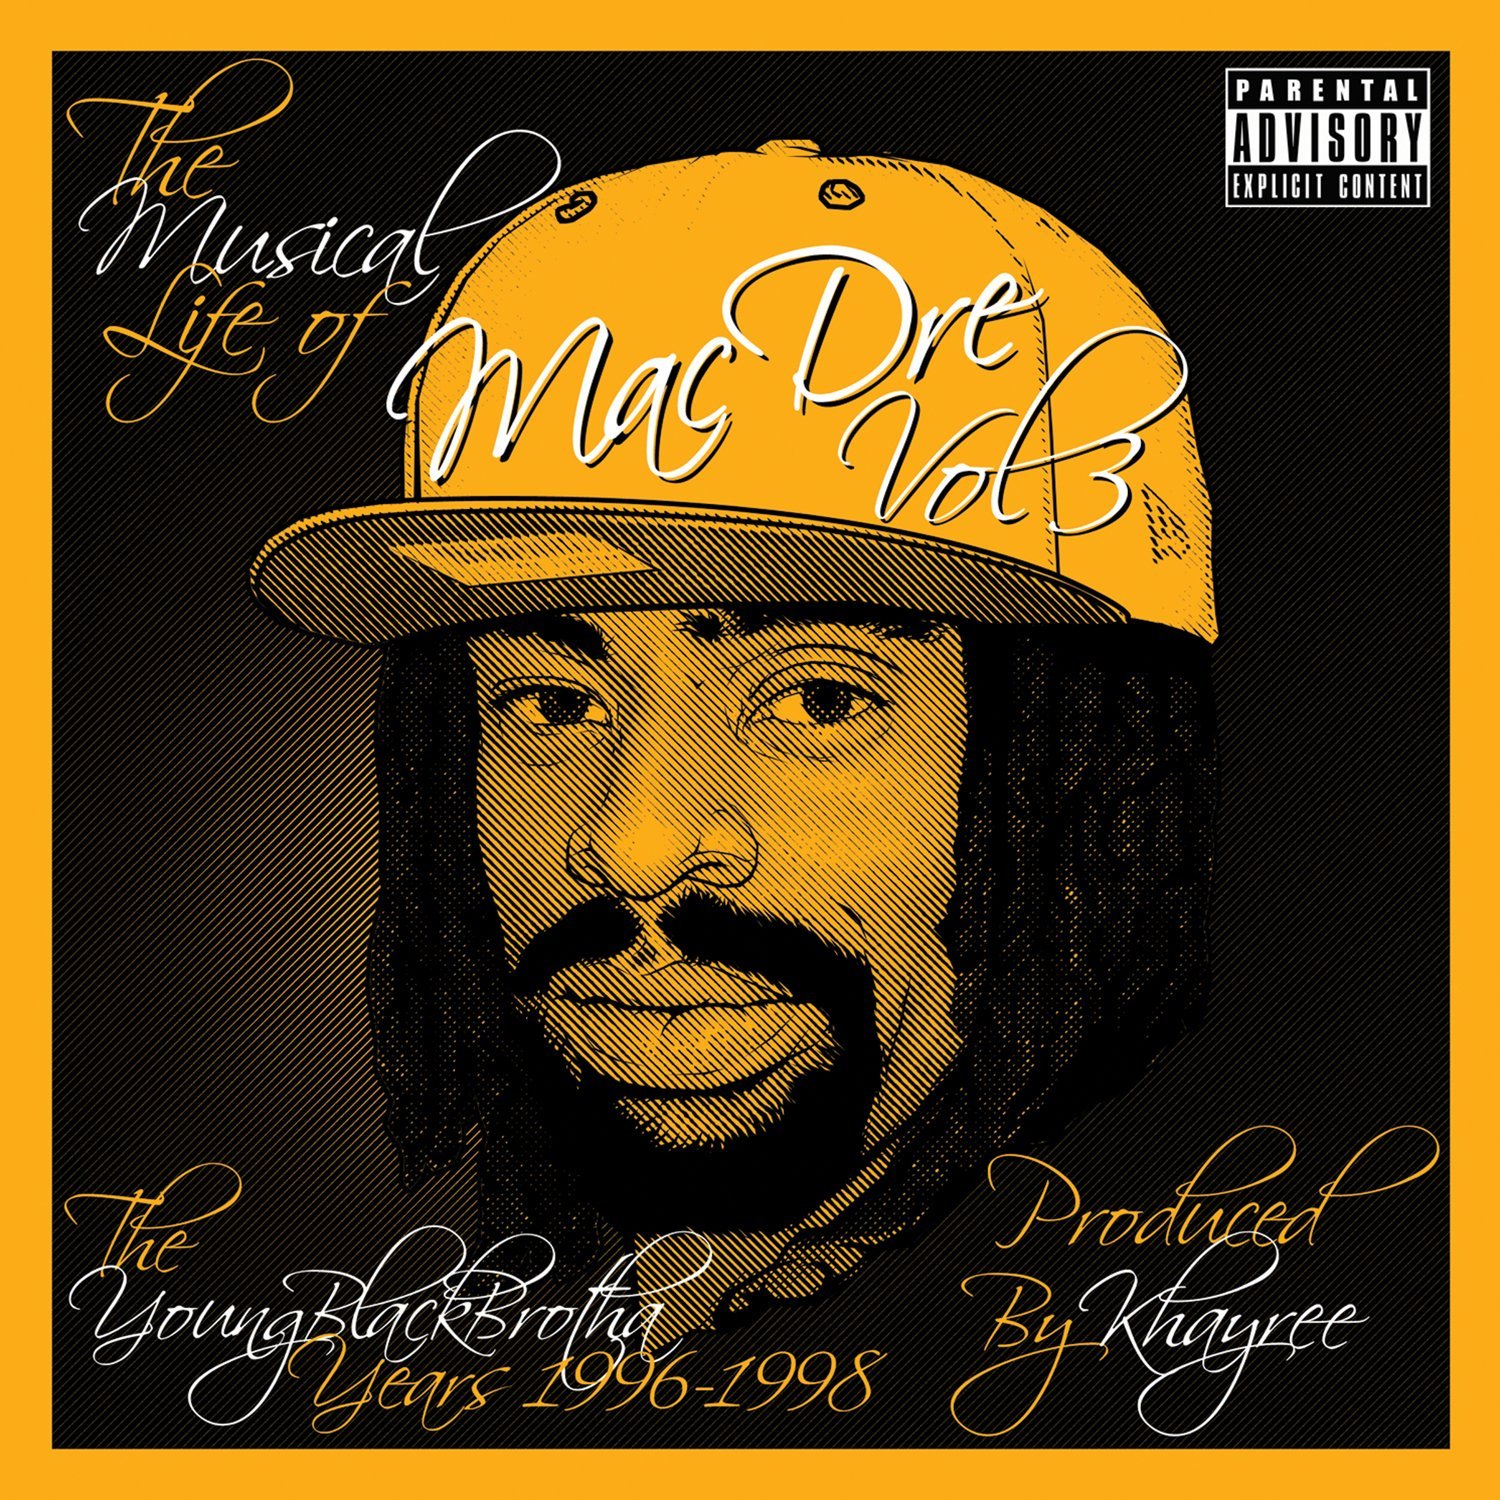 News Added Nov 26, 2013 The third volume in the series of releases chronicling the early career of Mac Dre. Includes previously unreleased tracks. Submitted By Foodstamp420 Track list: Added Nov 26, 2013 1. We Take You To 1996 2. If You Don't Do Nothin' (Interlude) 3. What Cha Like 4. And What Is Ya […]